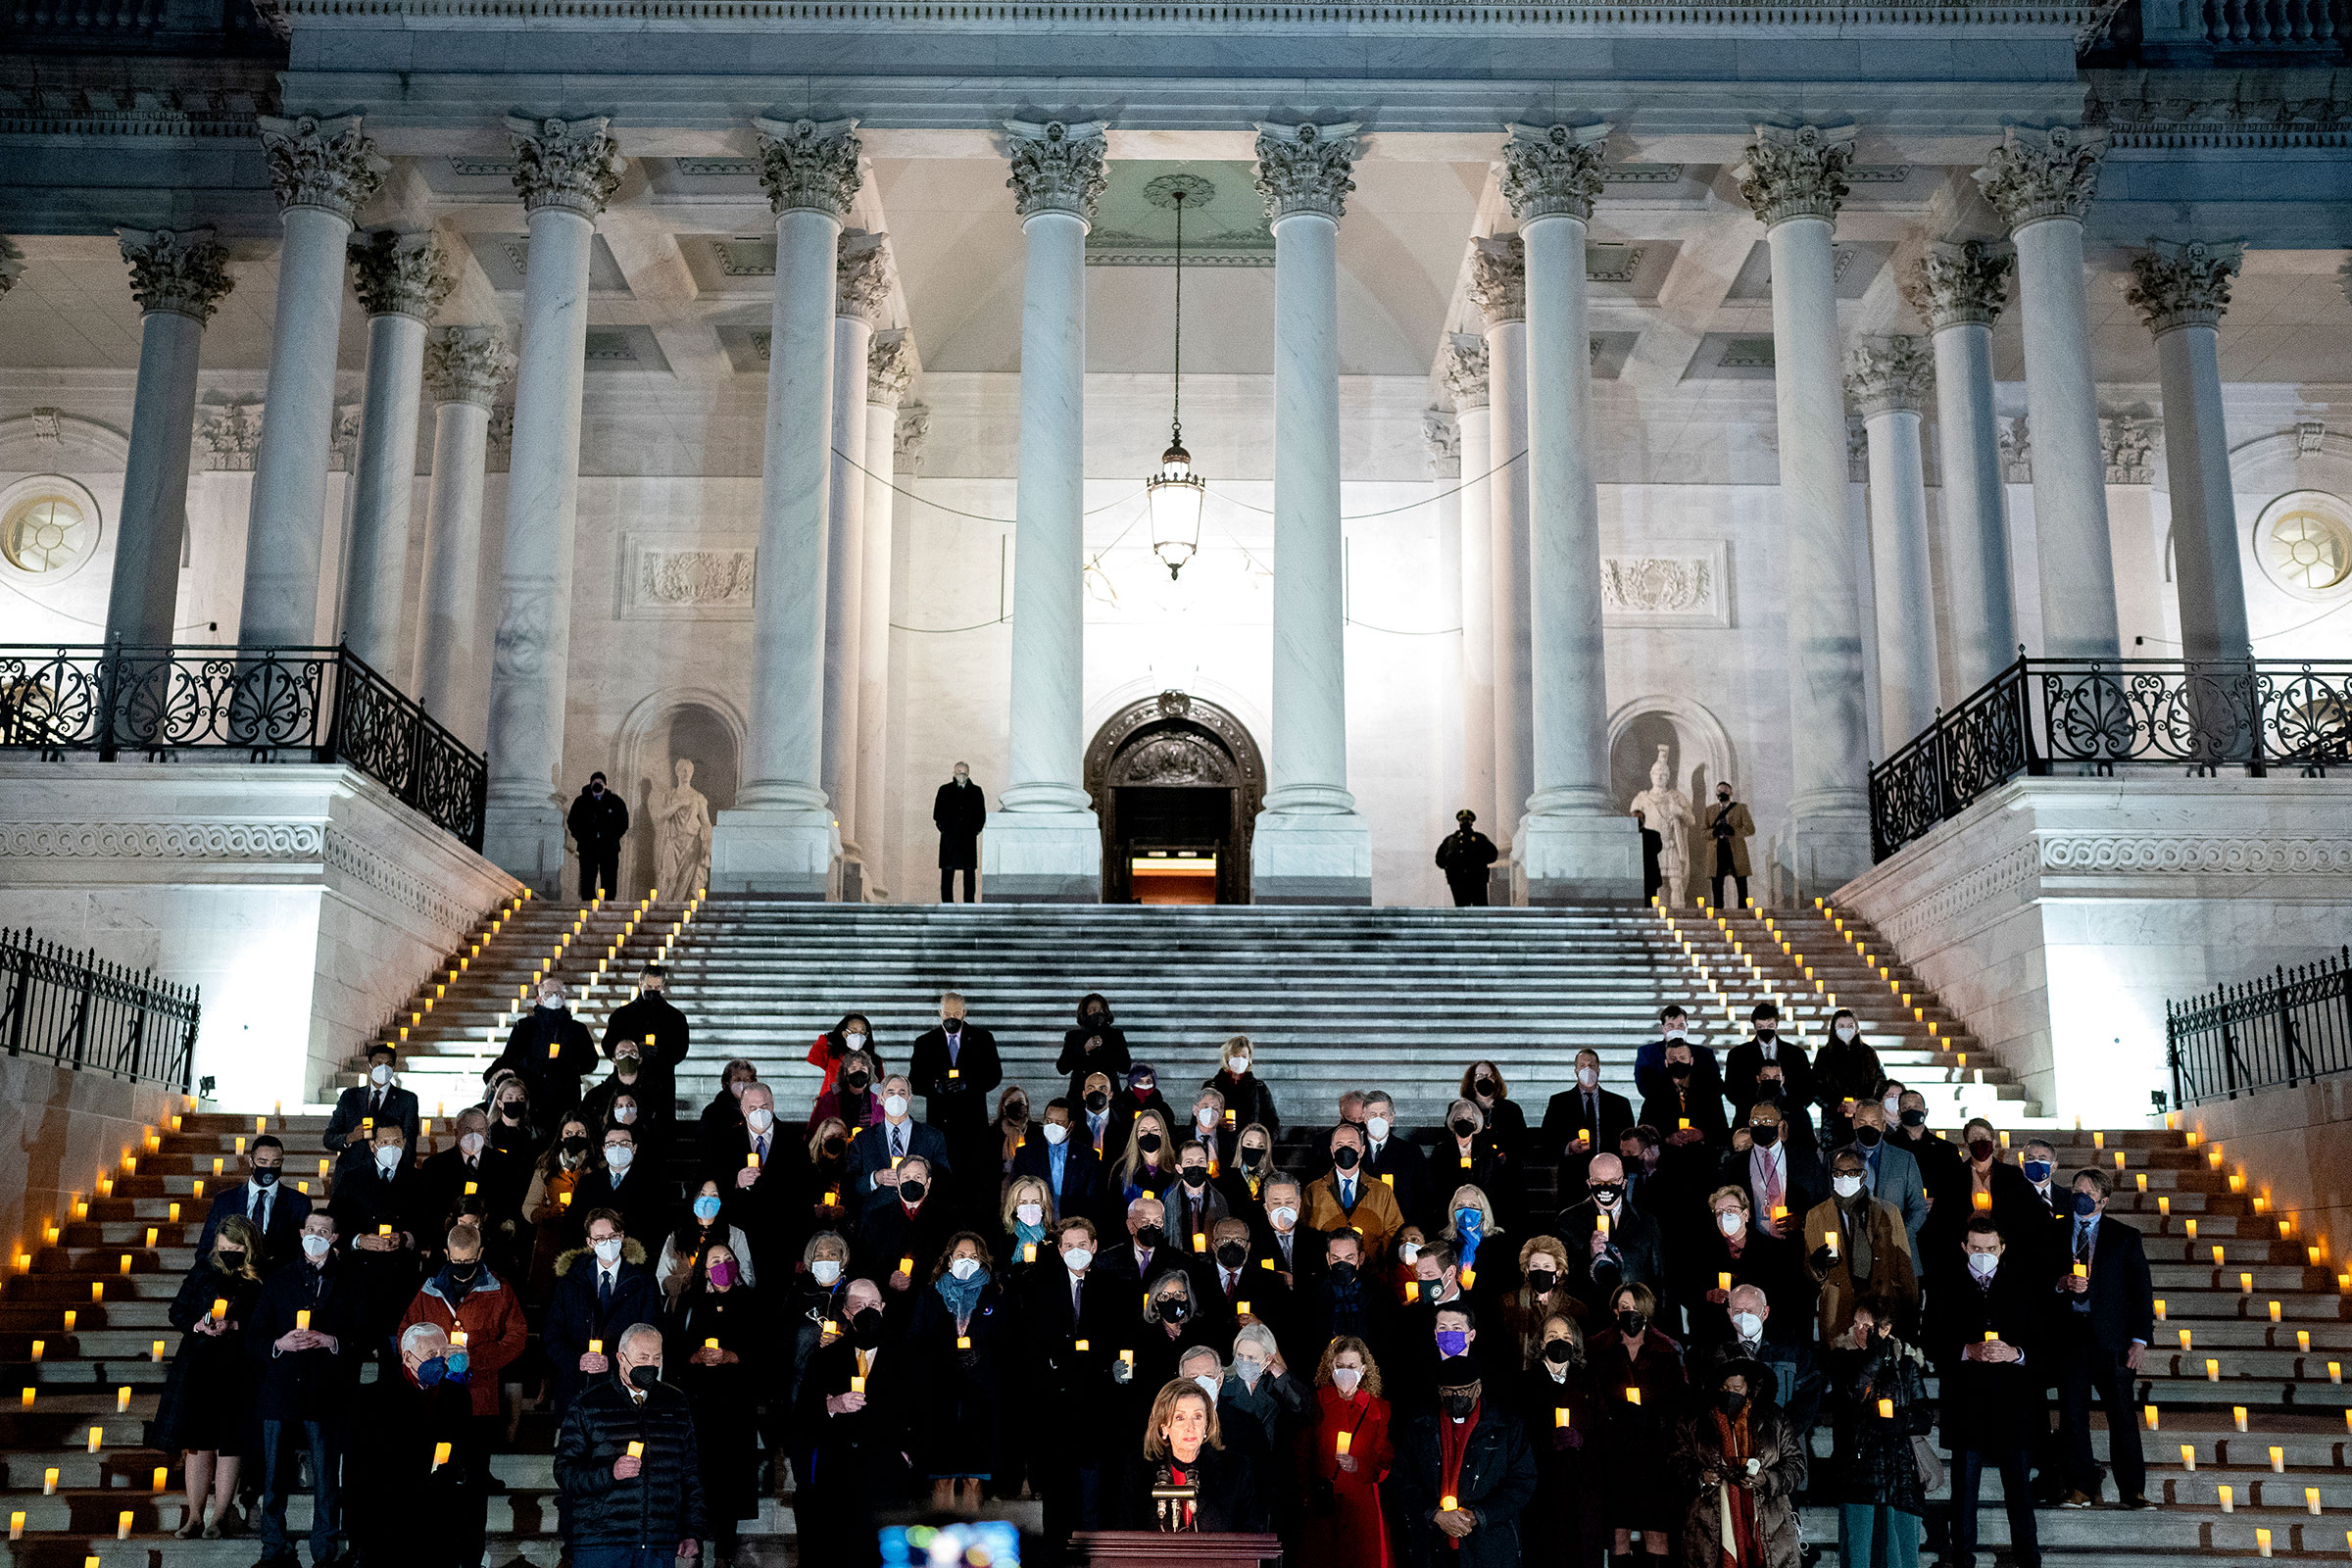 One Year Anniversary Of January 6 Insurrection At U.S. Capitol